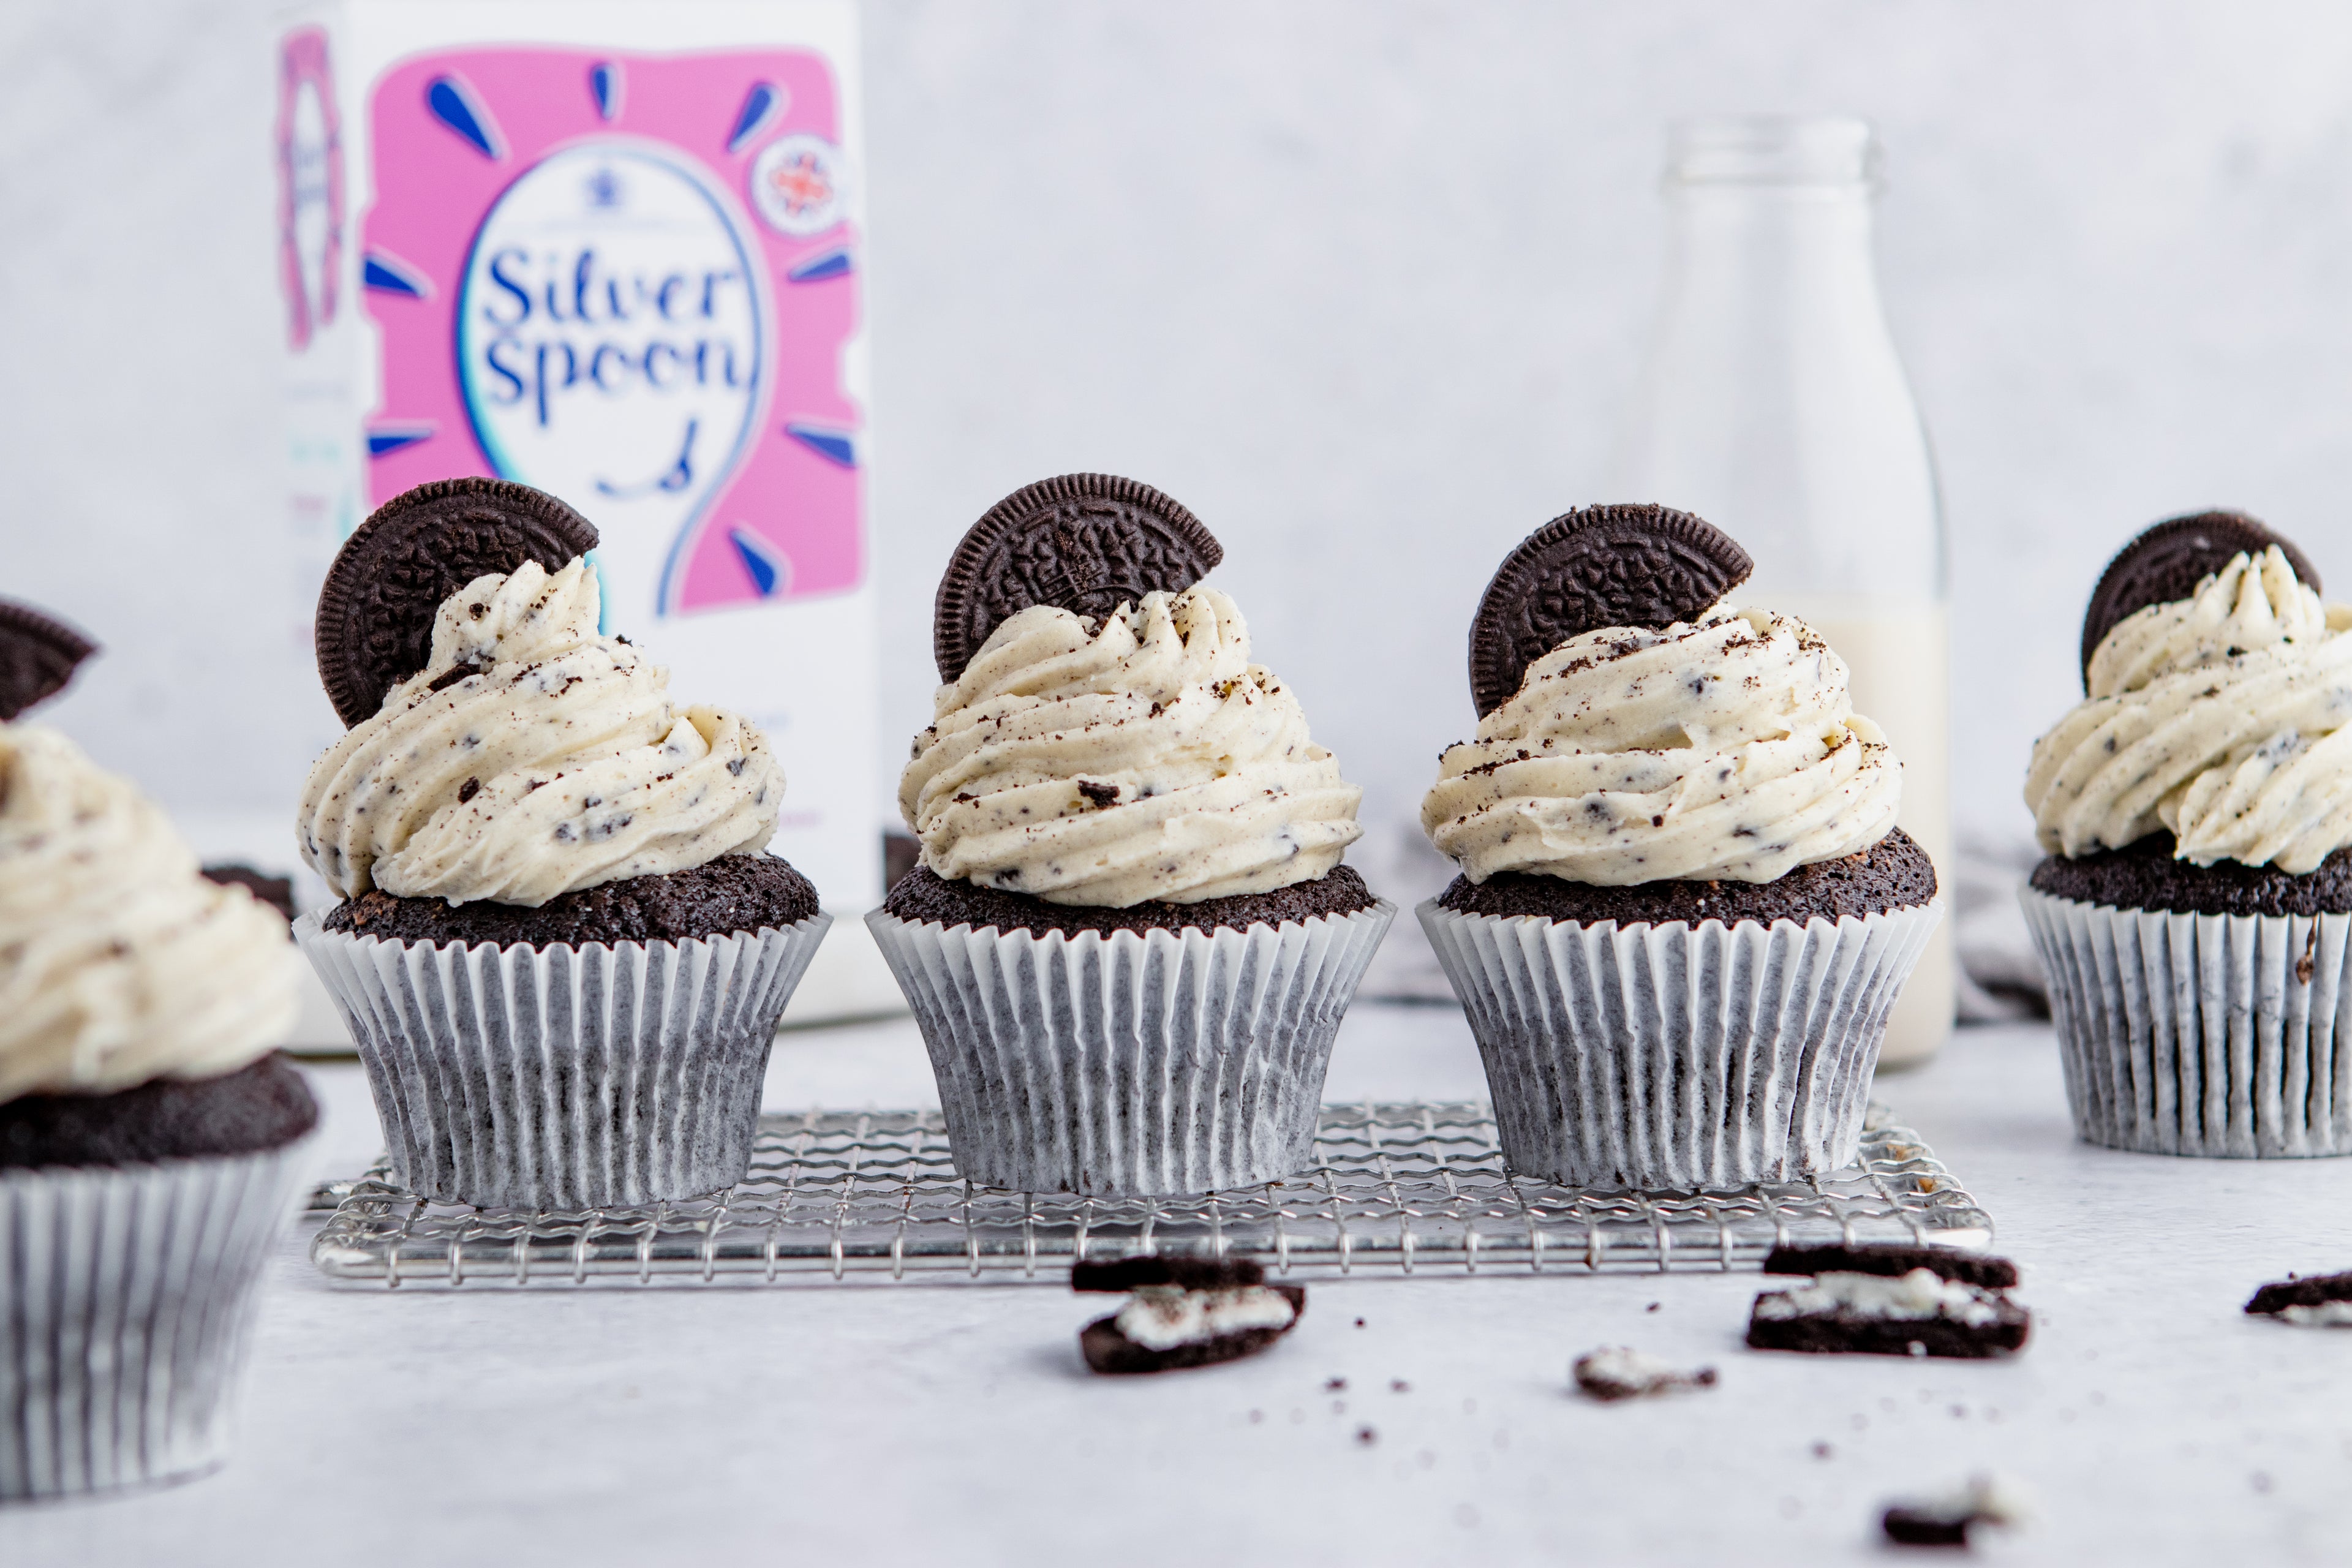 Oreo Cupcakes with Silver Spoon Icing Sugar in the background and oreo crumbs